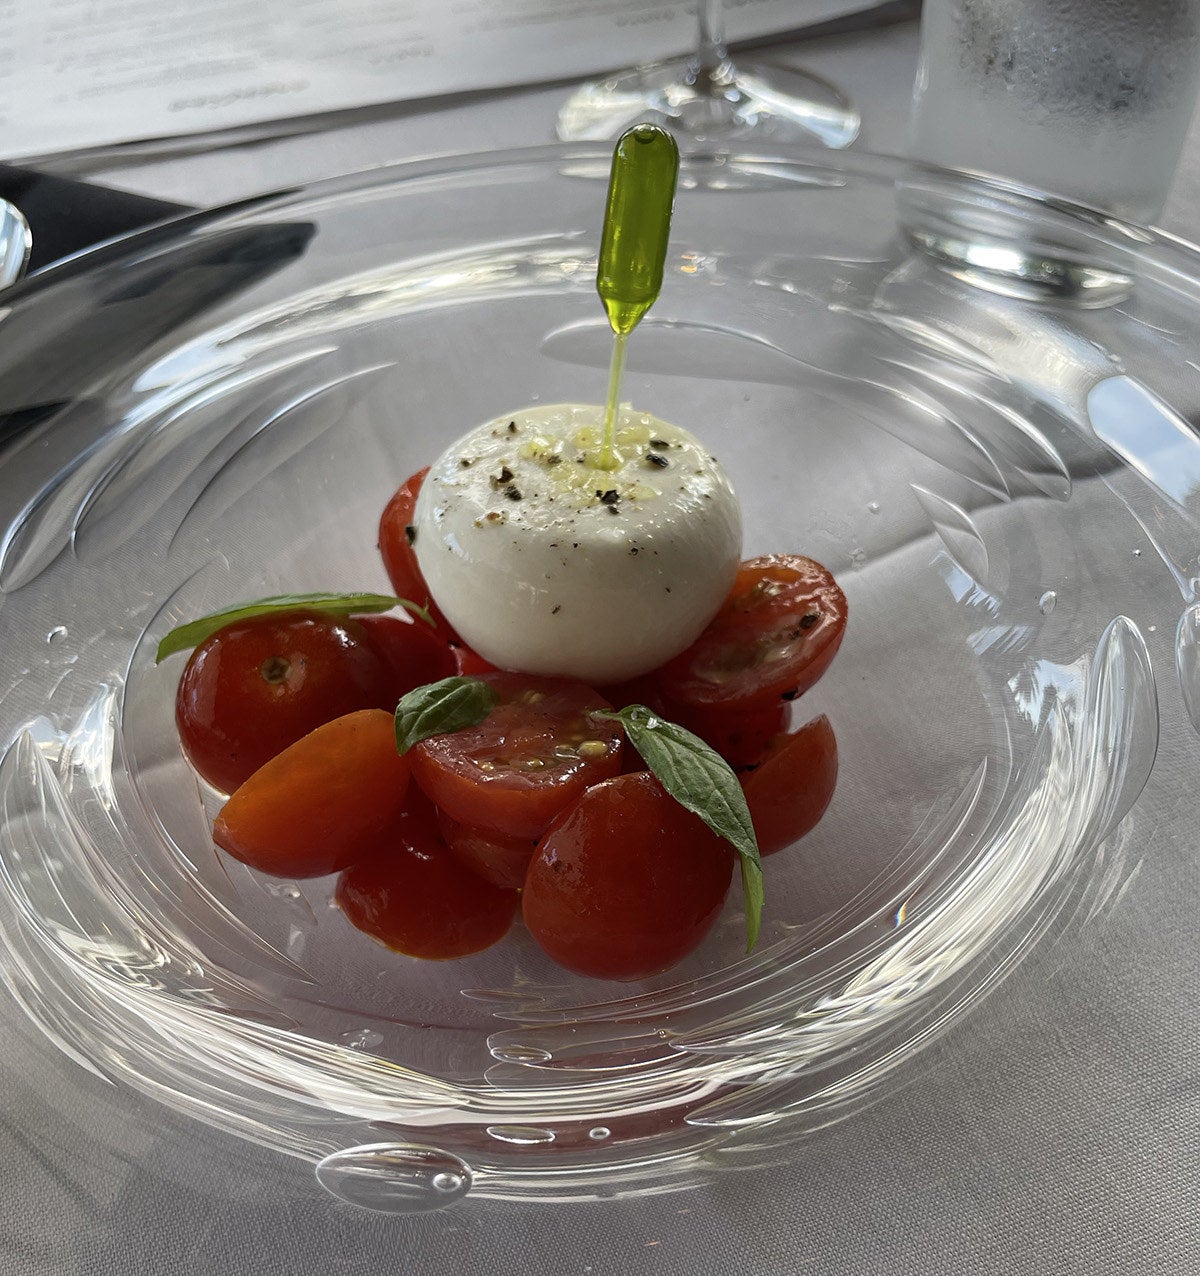 A glass plate with fresh tomatoes and burrata and a small dropper containing a greenish olive oil